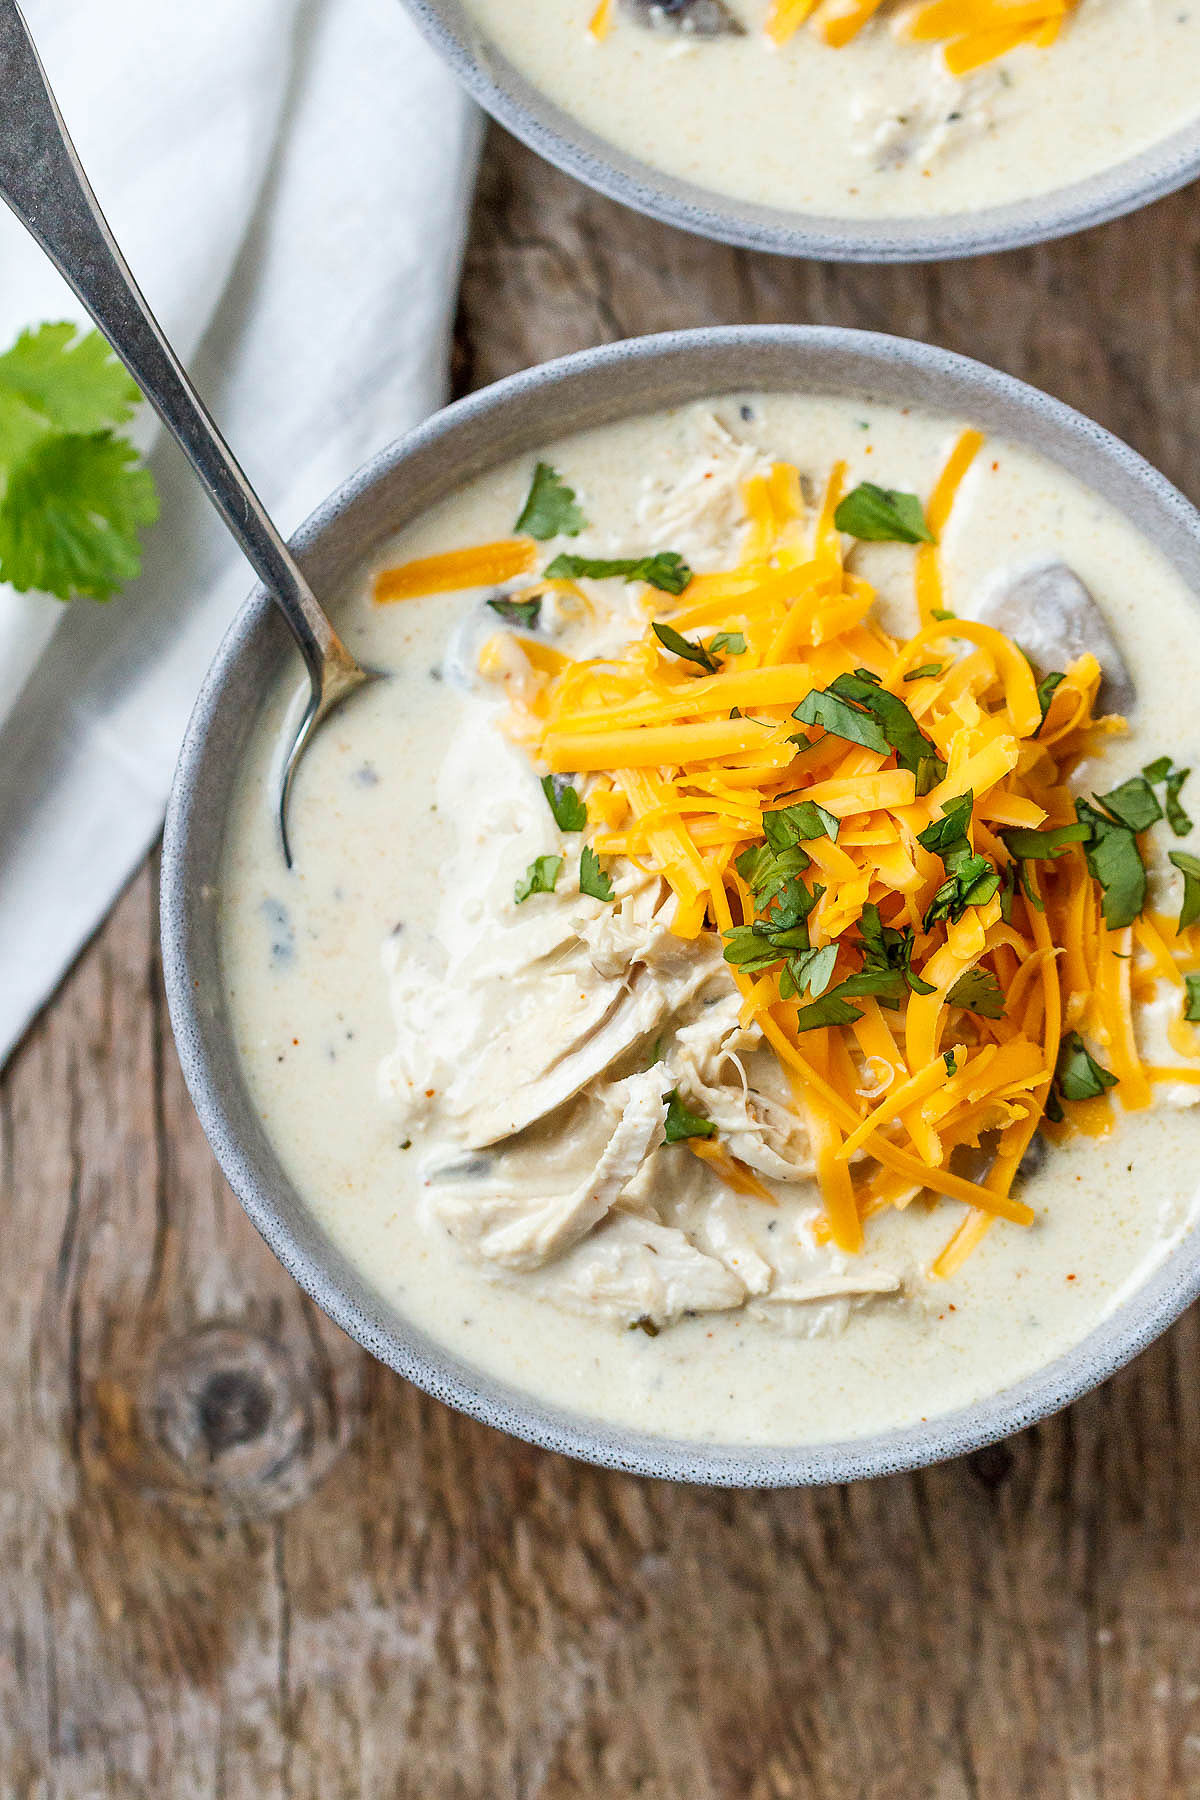 Slow Cooker Leftovers Turkey Cream Cheese Soup - Rich and velvety, you'll enjoy every spoonful of this hearty turkey cream cheese soup!